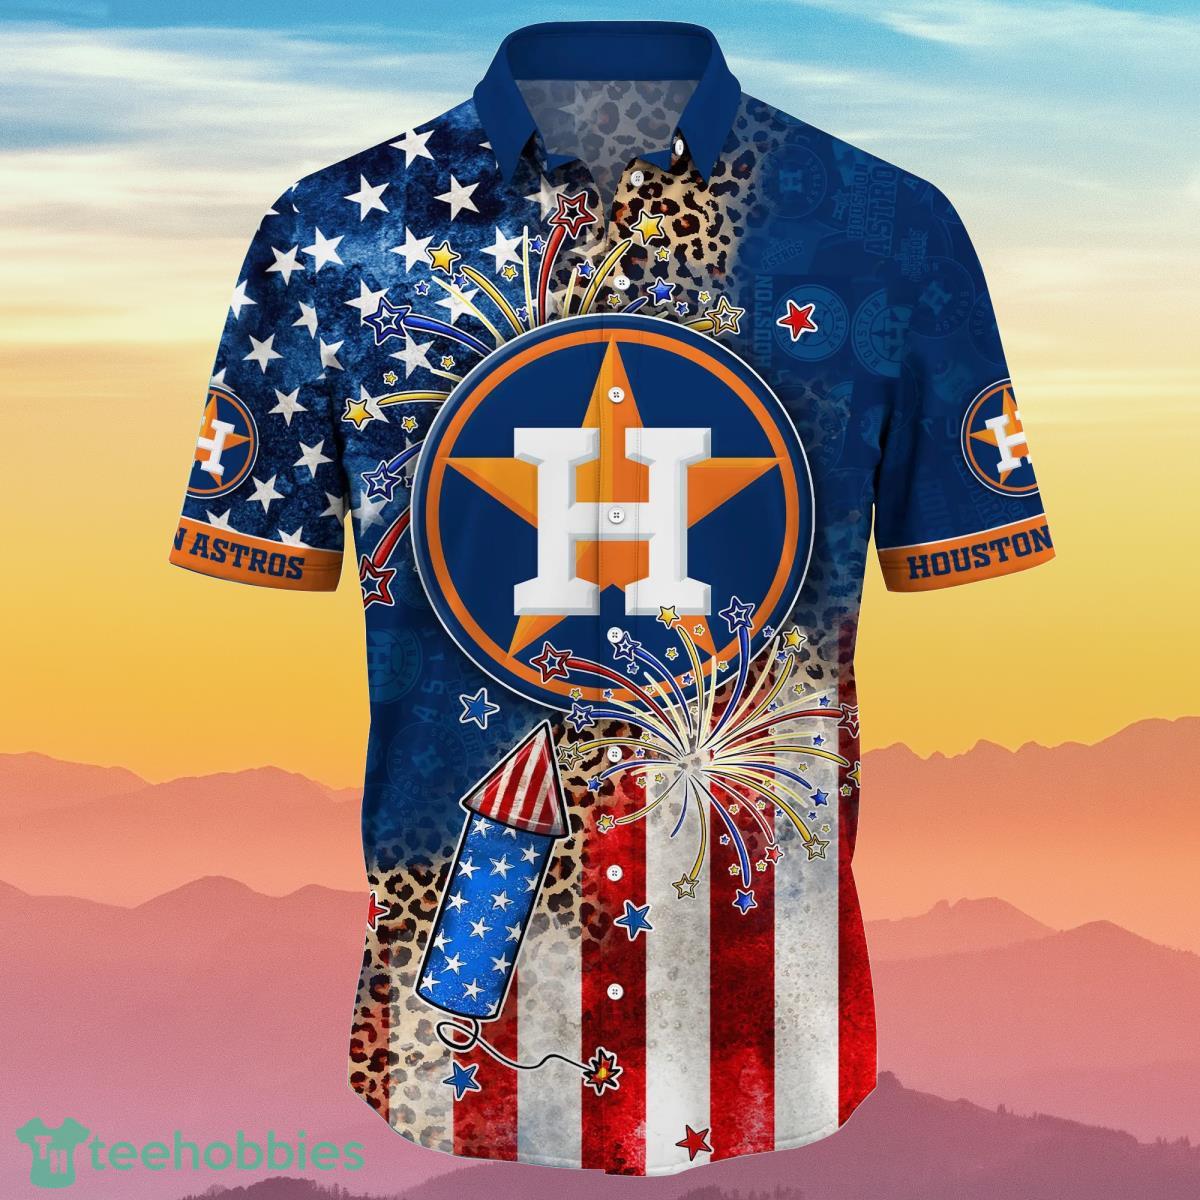 astros 4th of july shirt